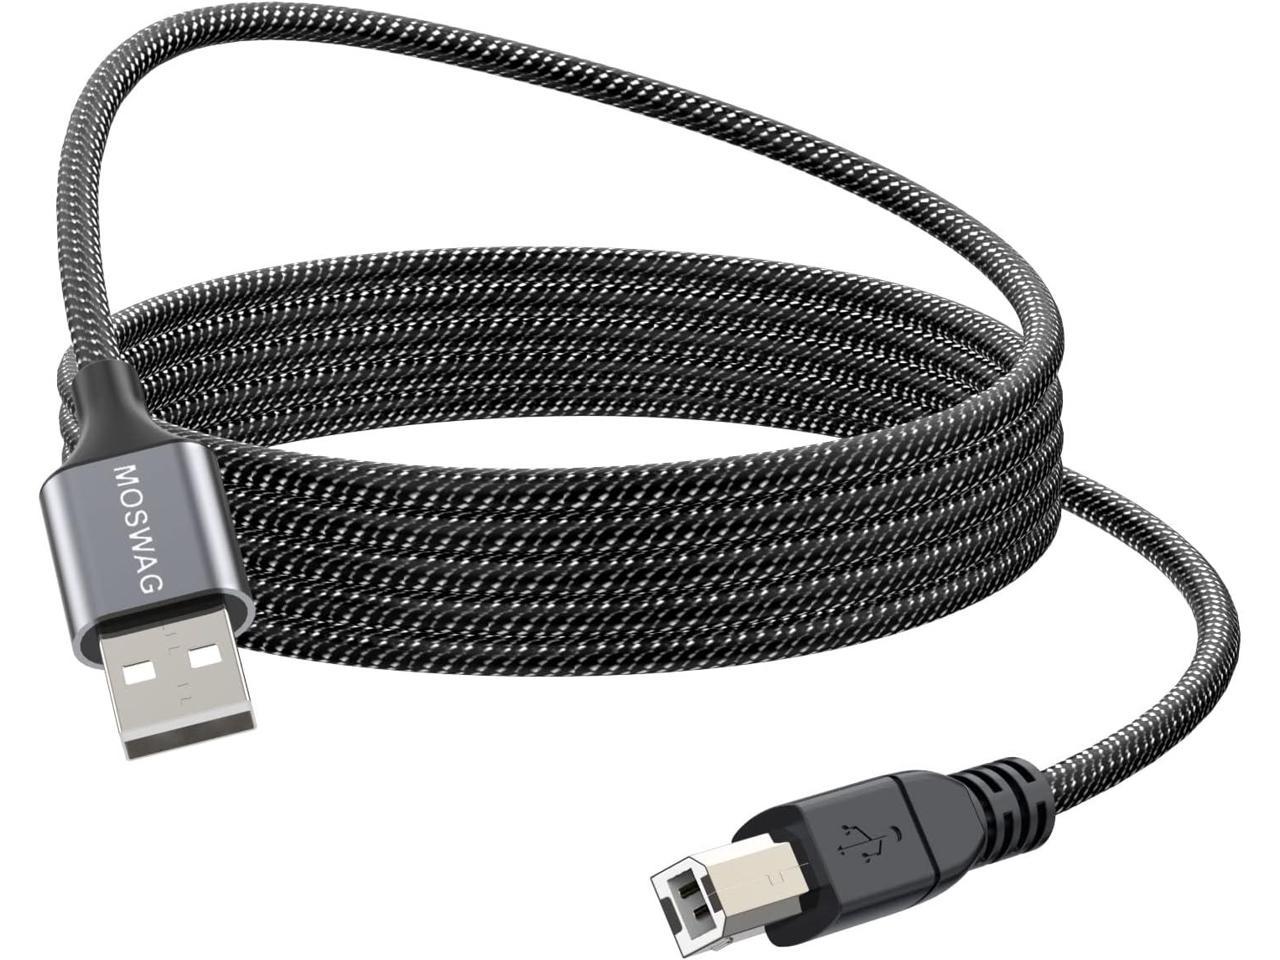 JIB Boaacoustic BlackBerry USB Printer Cable USB A to USB B High Speed Cable 5M 